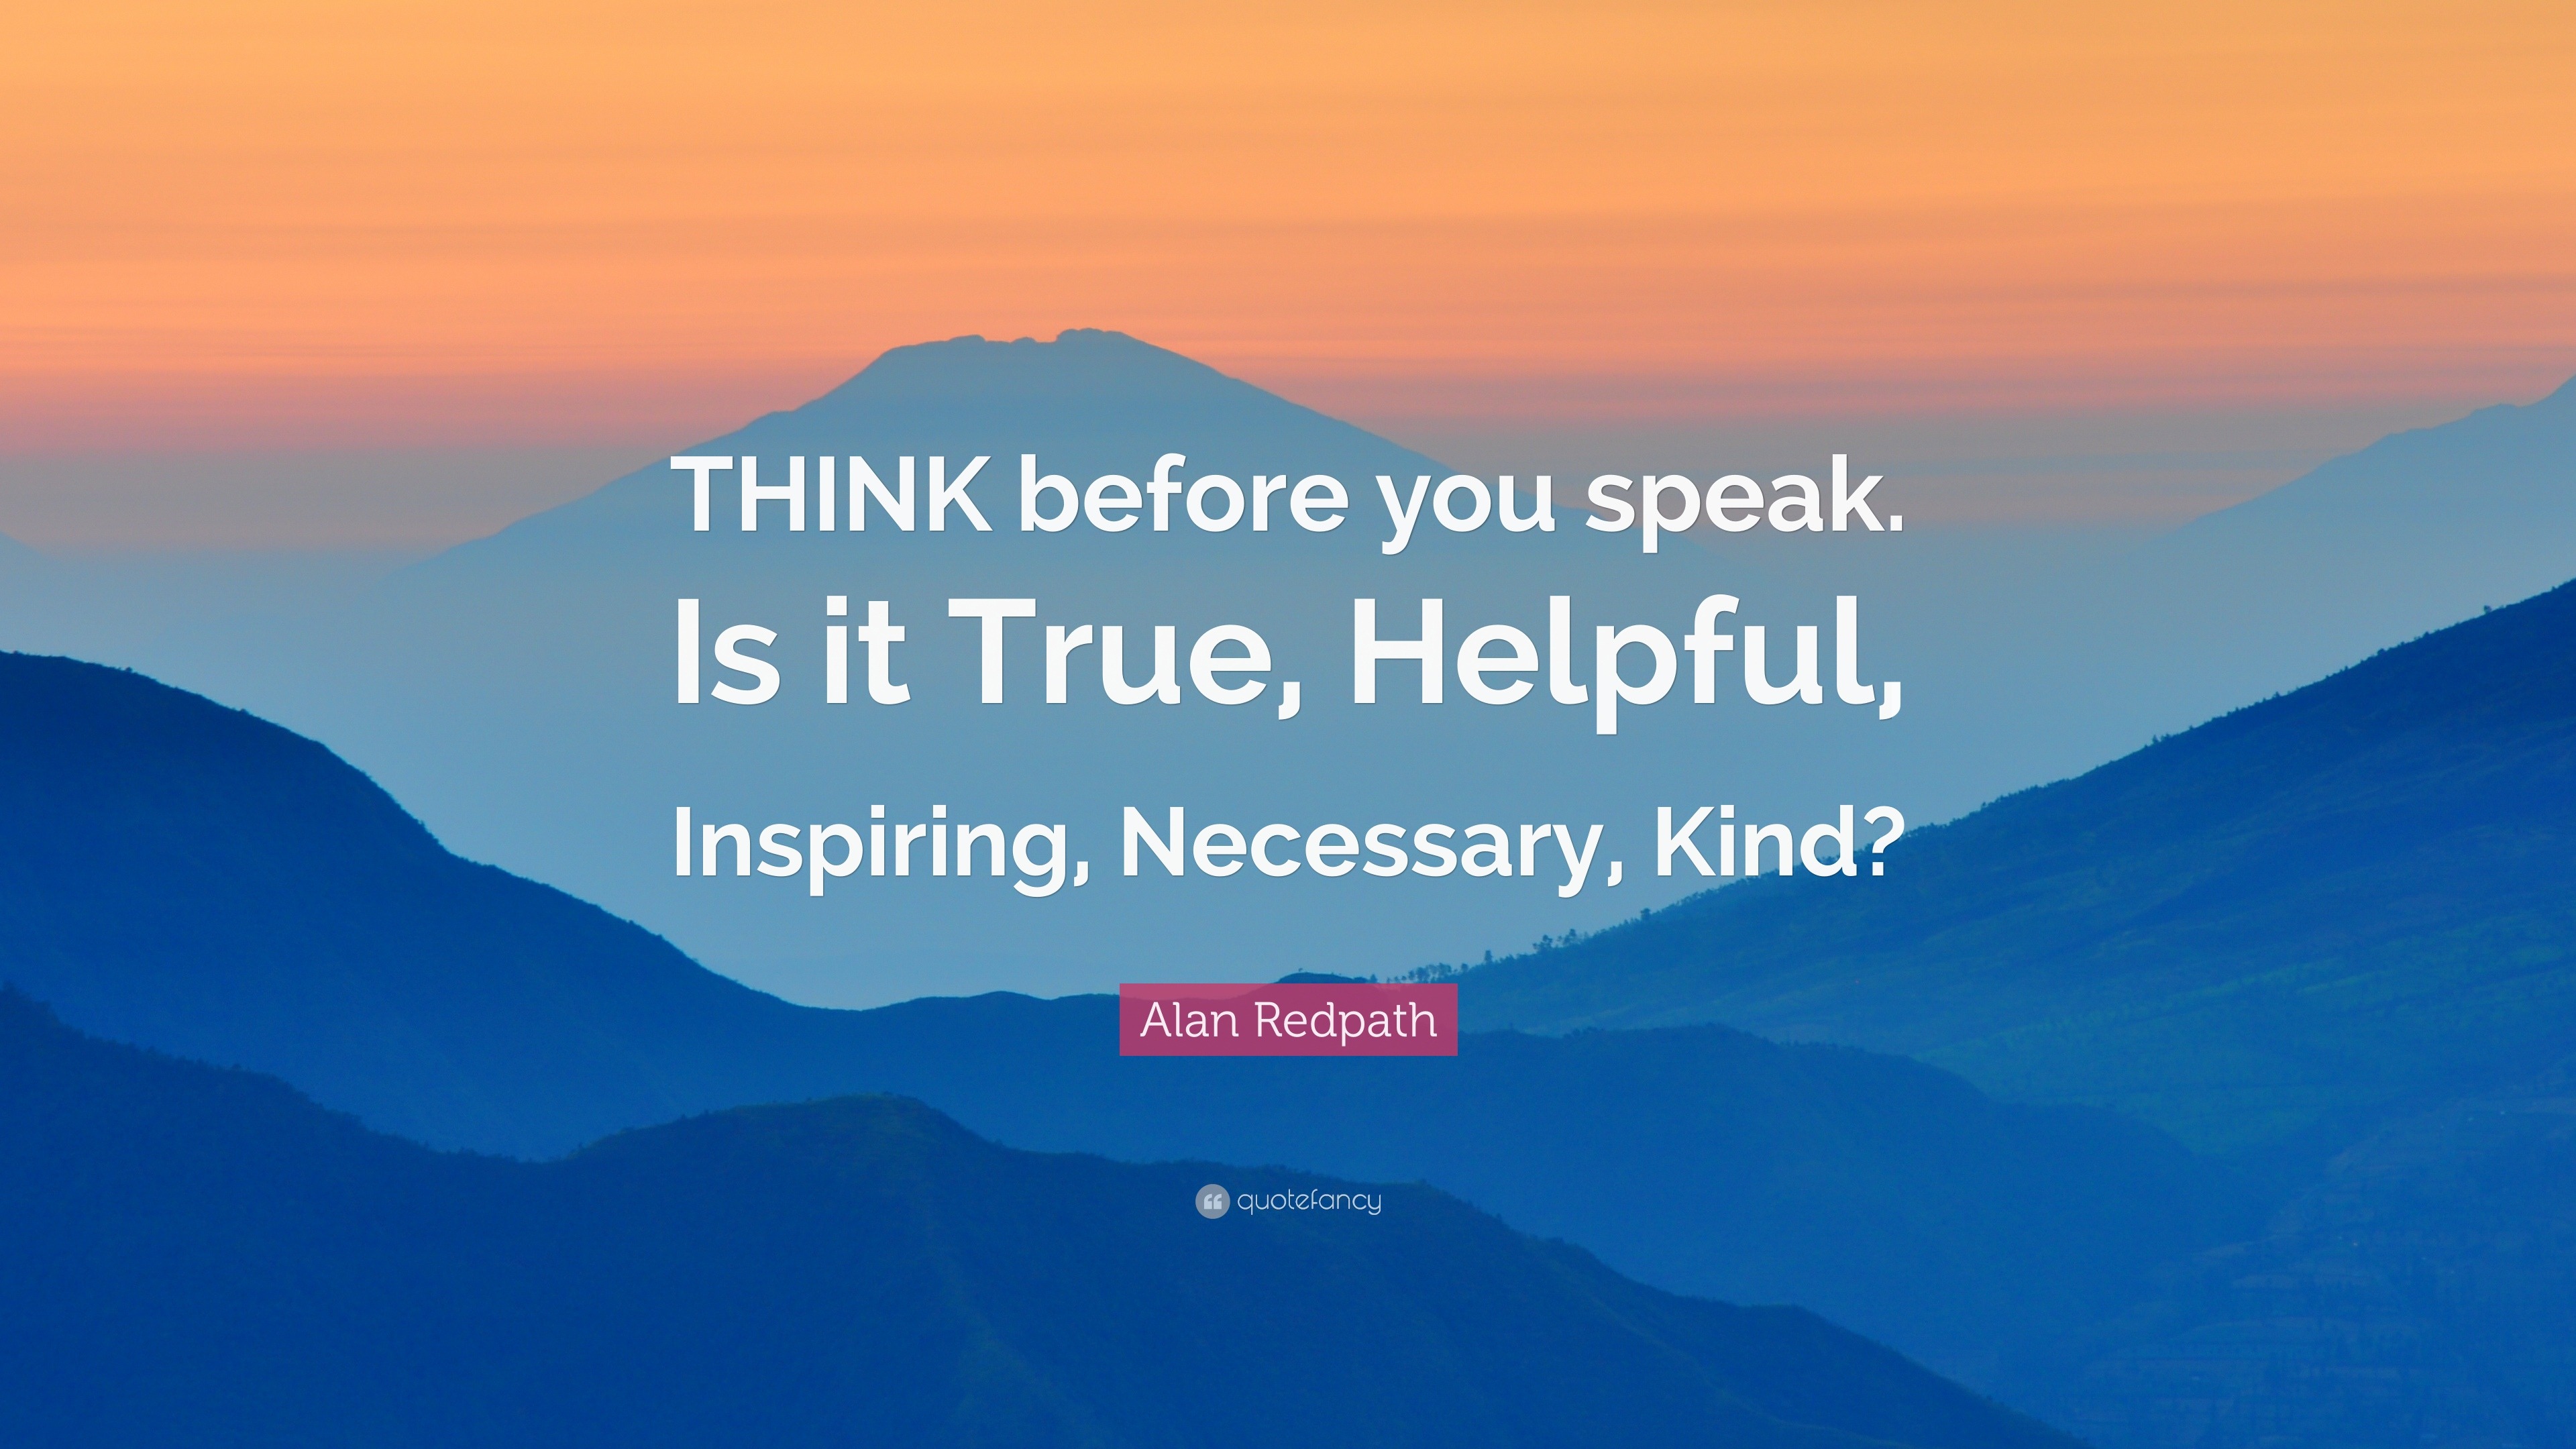 alan-redpath-quote-think-before-you-speak-is-it-true-helpful